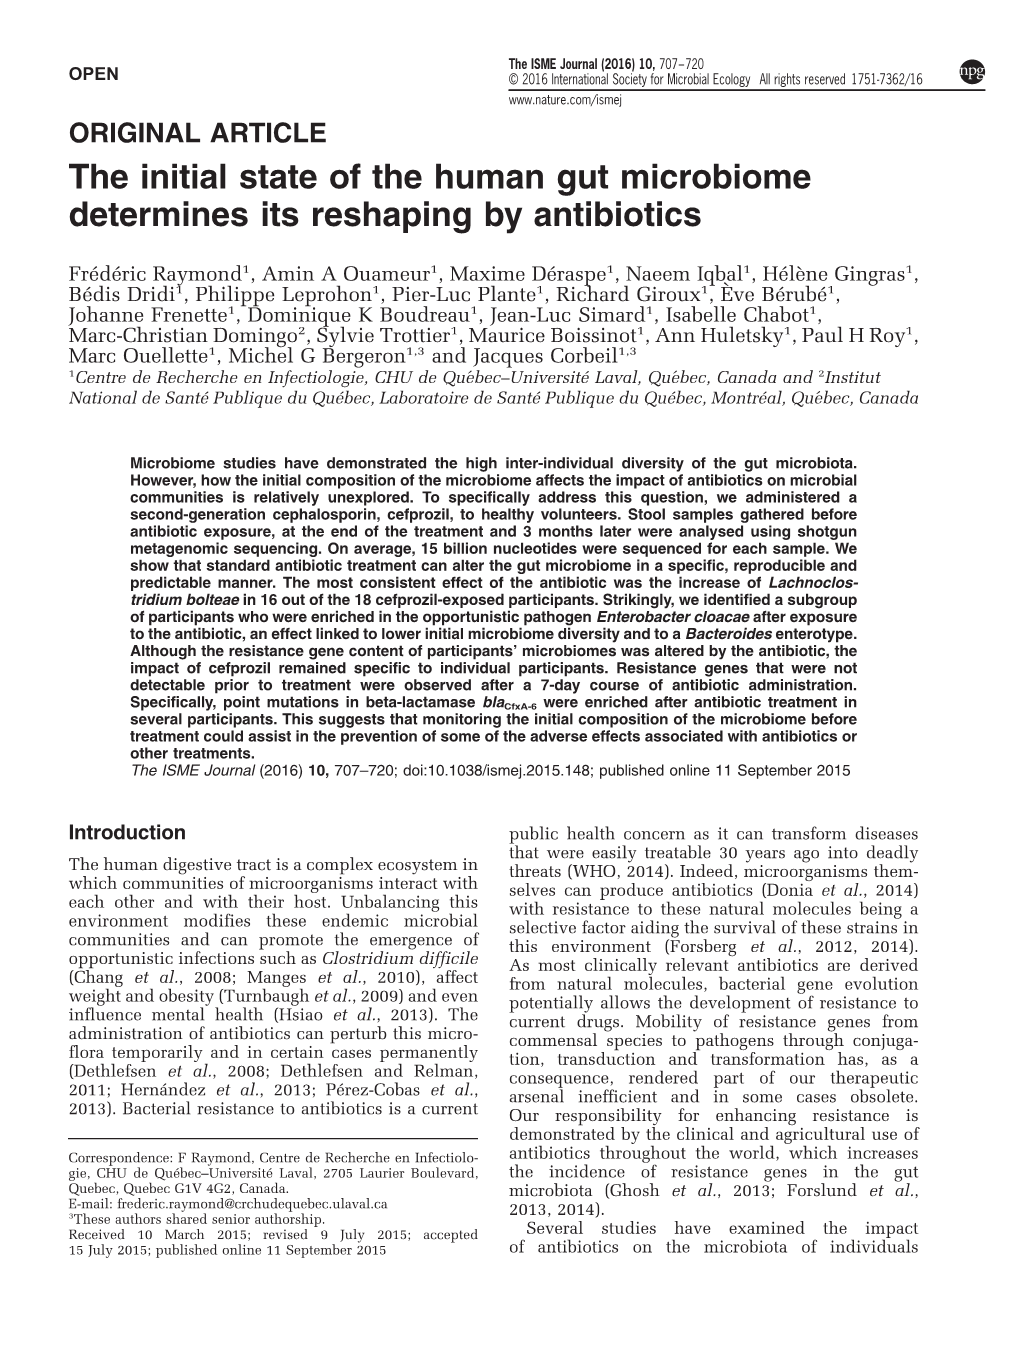 The Initial State of the Human Gut Microbiome Determines Its Reshaping by Antibiotics